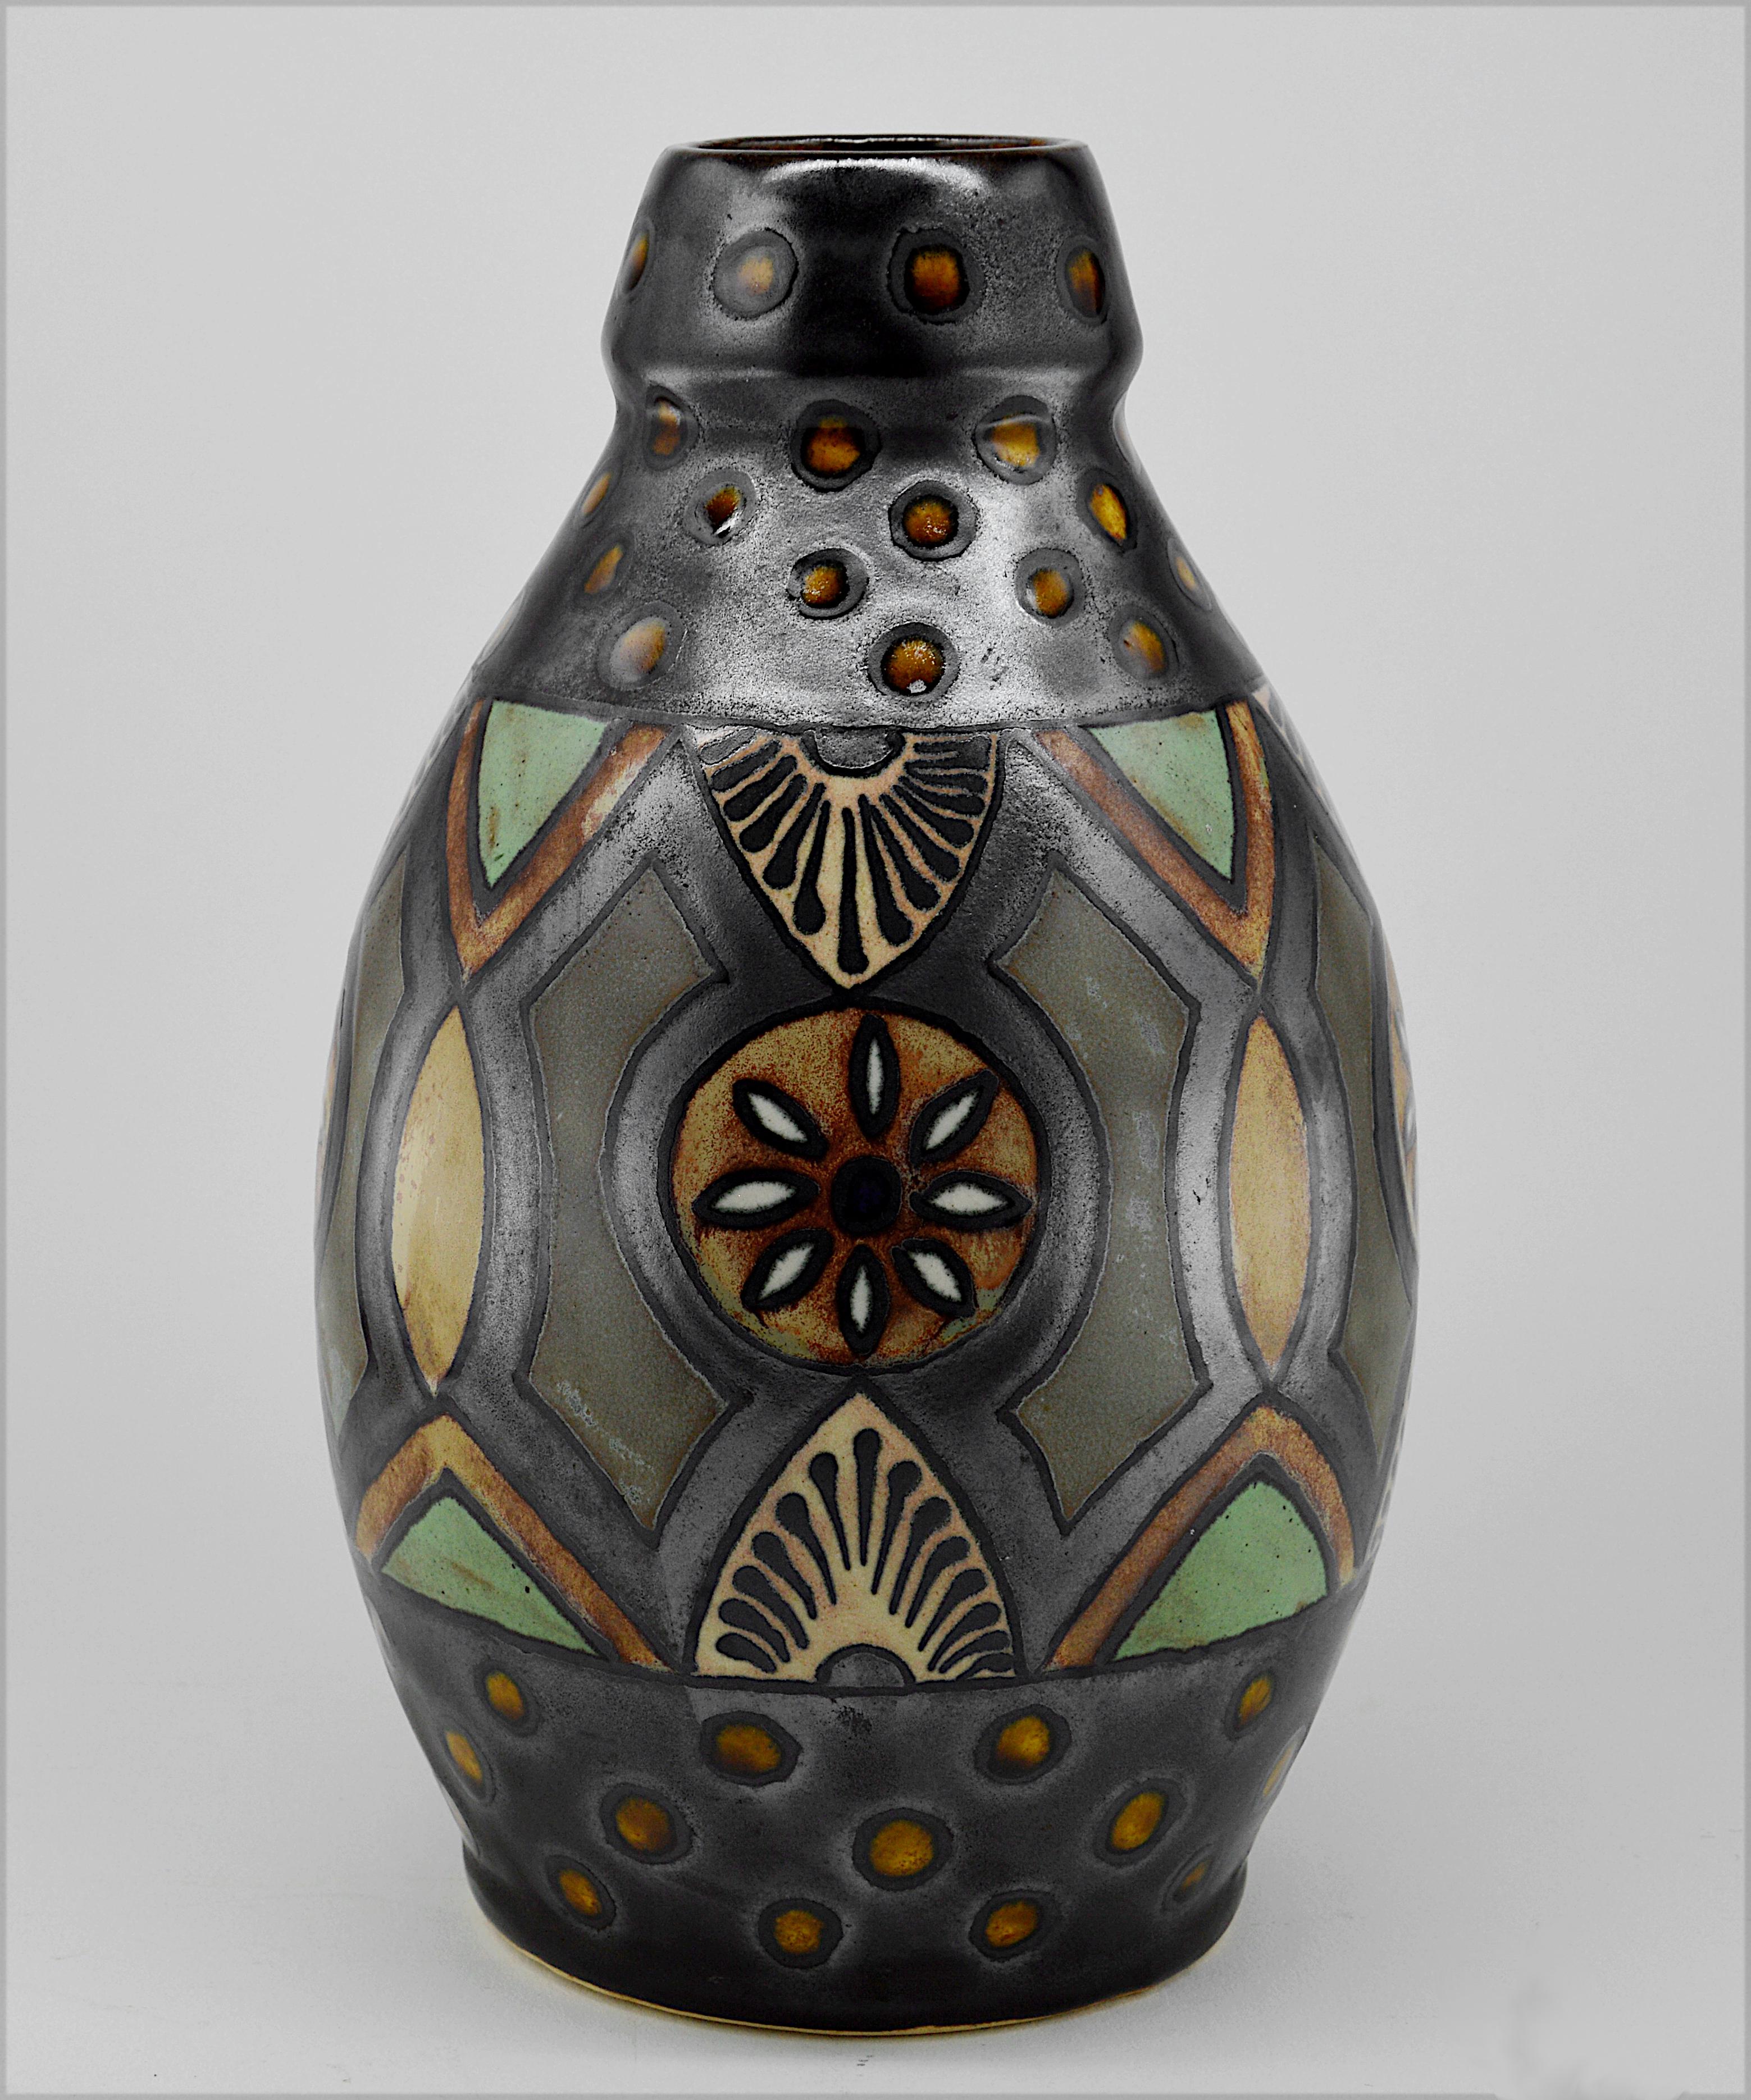 Any fair offer will be examined with the utmost attention, please send a message. French Art Deco vase by Odetta (de la Hubaudière, Quimper), France, early 1930s. Stoneware. Height : 24.5cm - 9.6 in. , Diameter : 15cm - 5.9 in.
Illustrated in